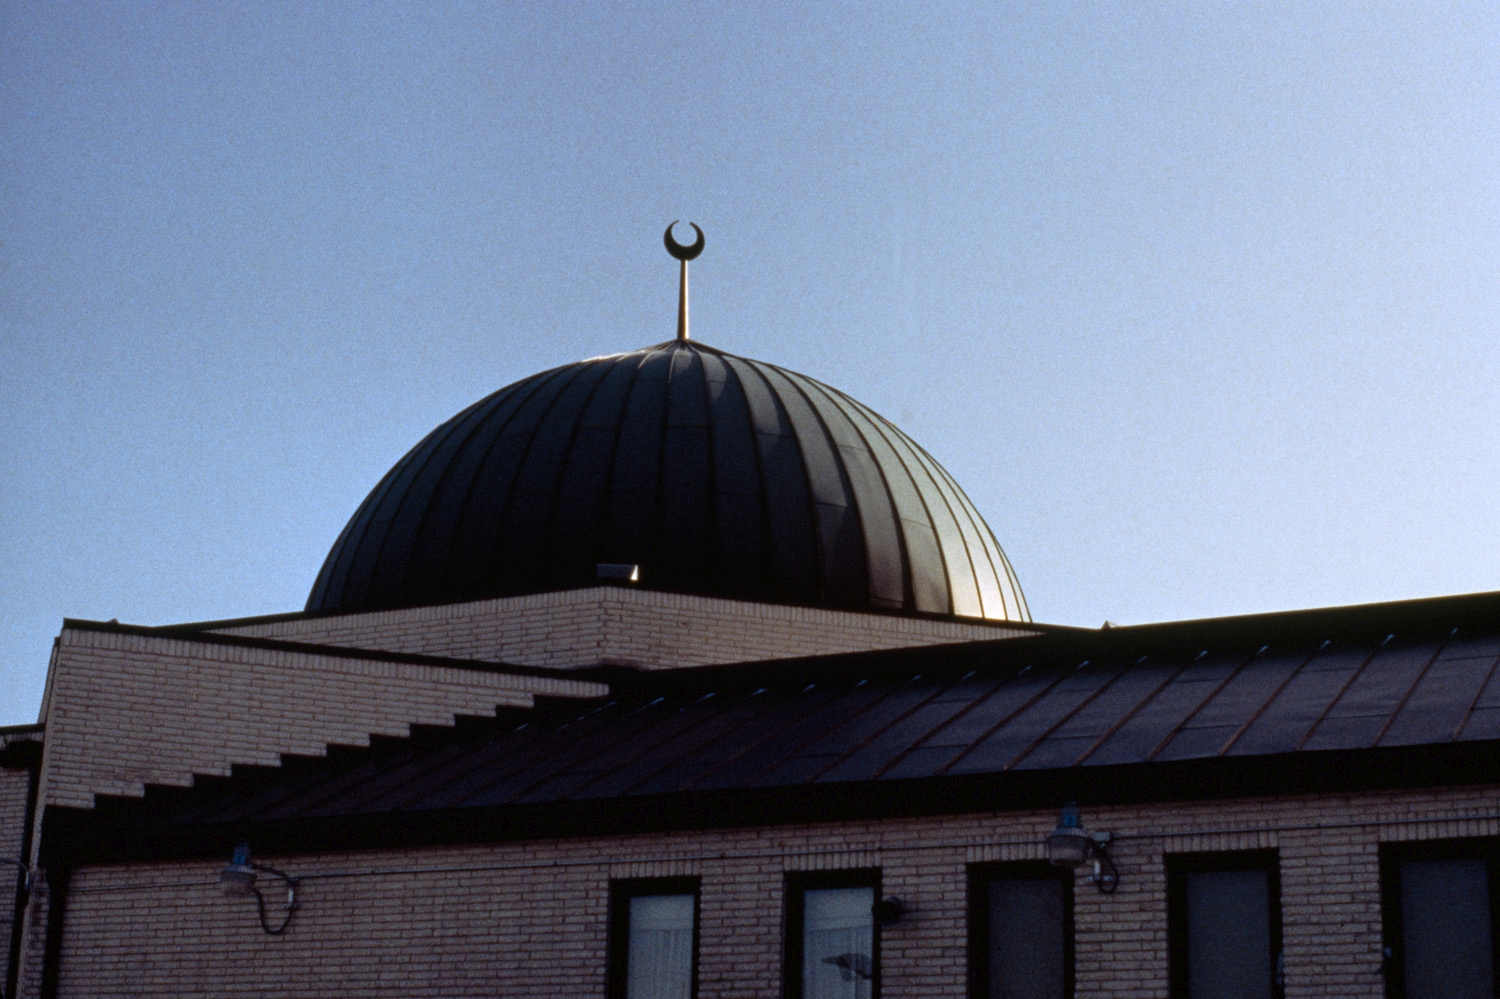 Exterior detail of roofline and dome; mosque prior to expansion